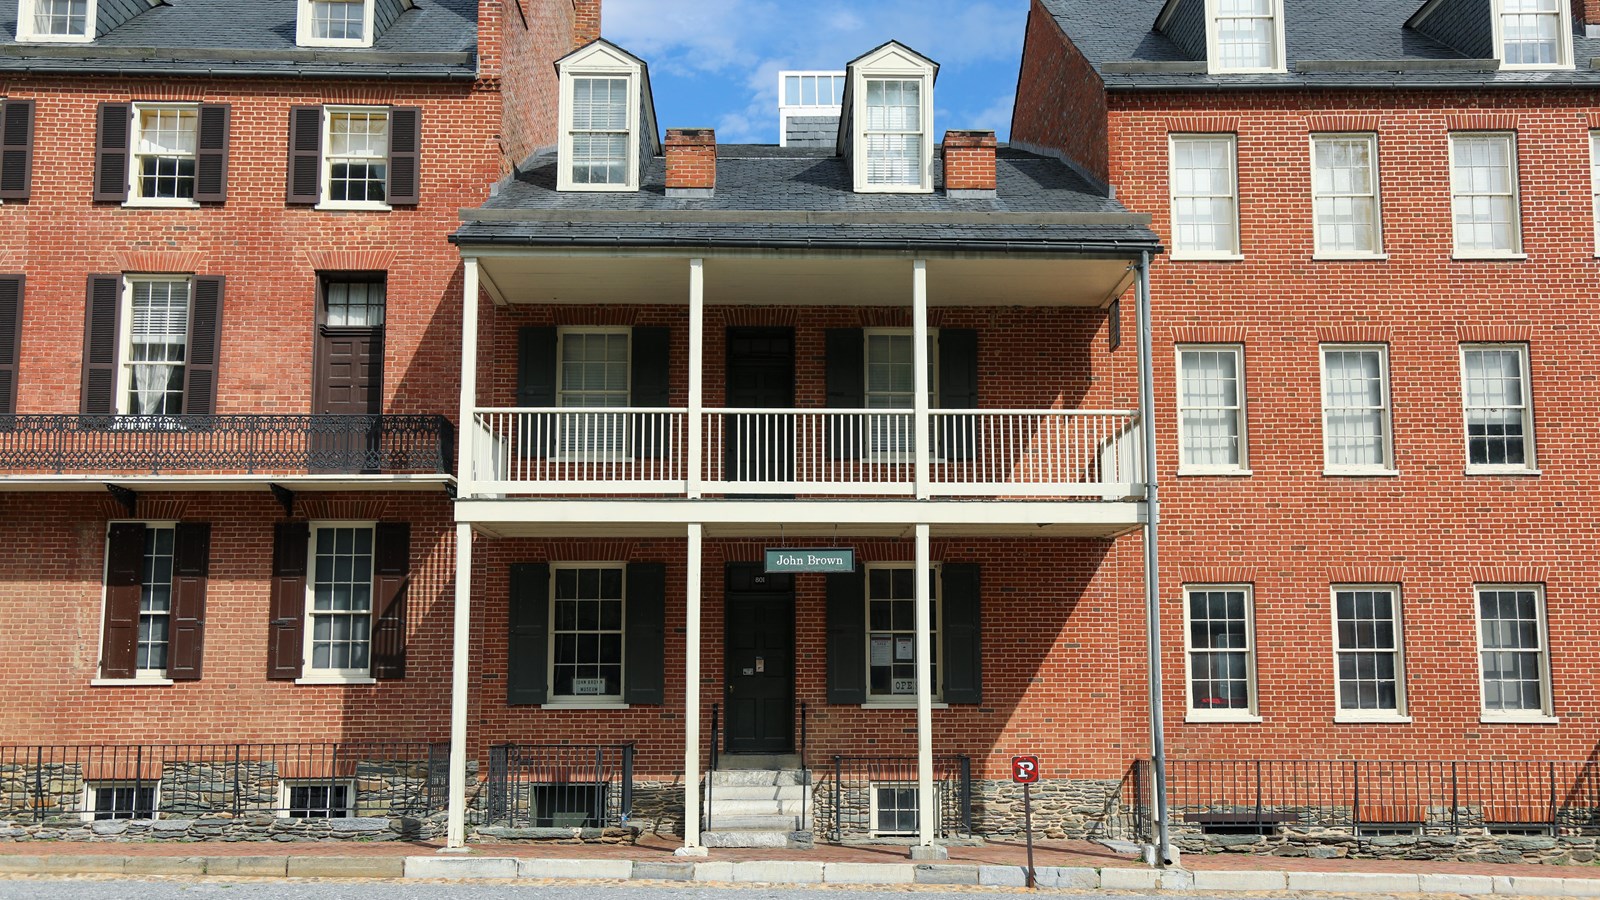 A brick rowhouse with balcony flanked by two taller rowhouses.